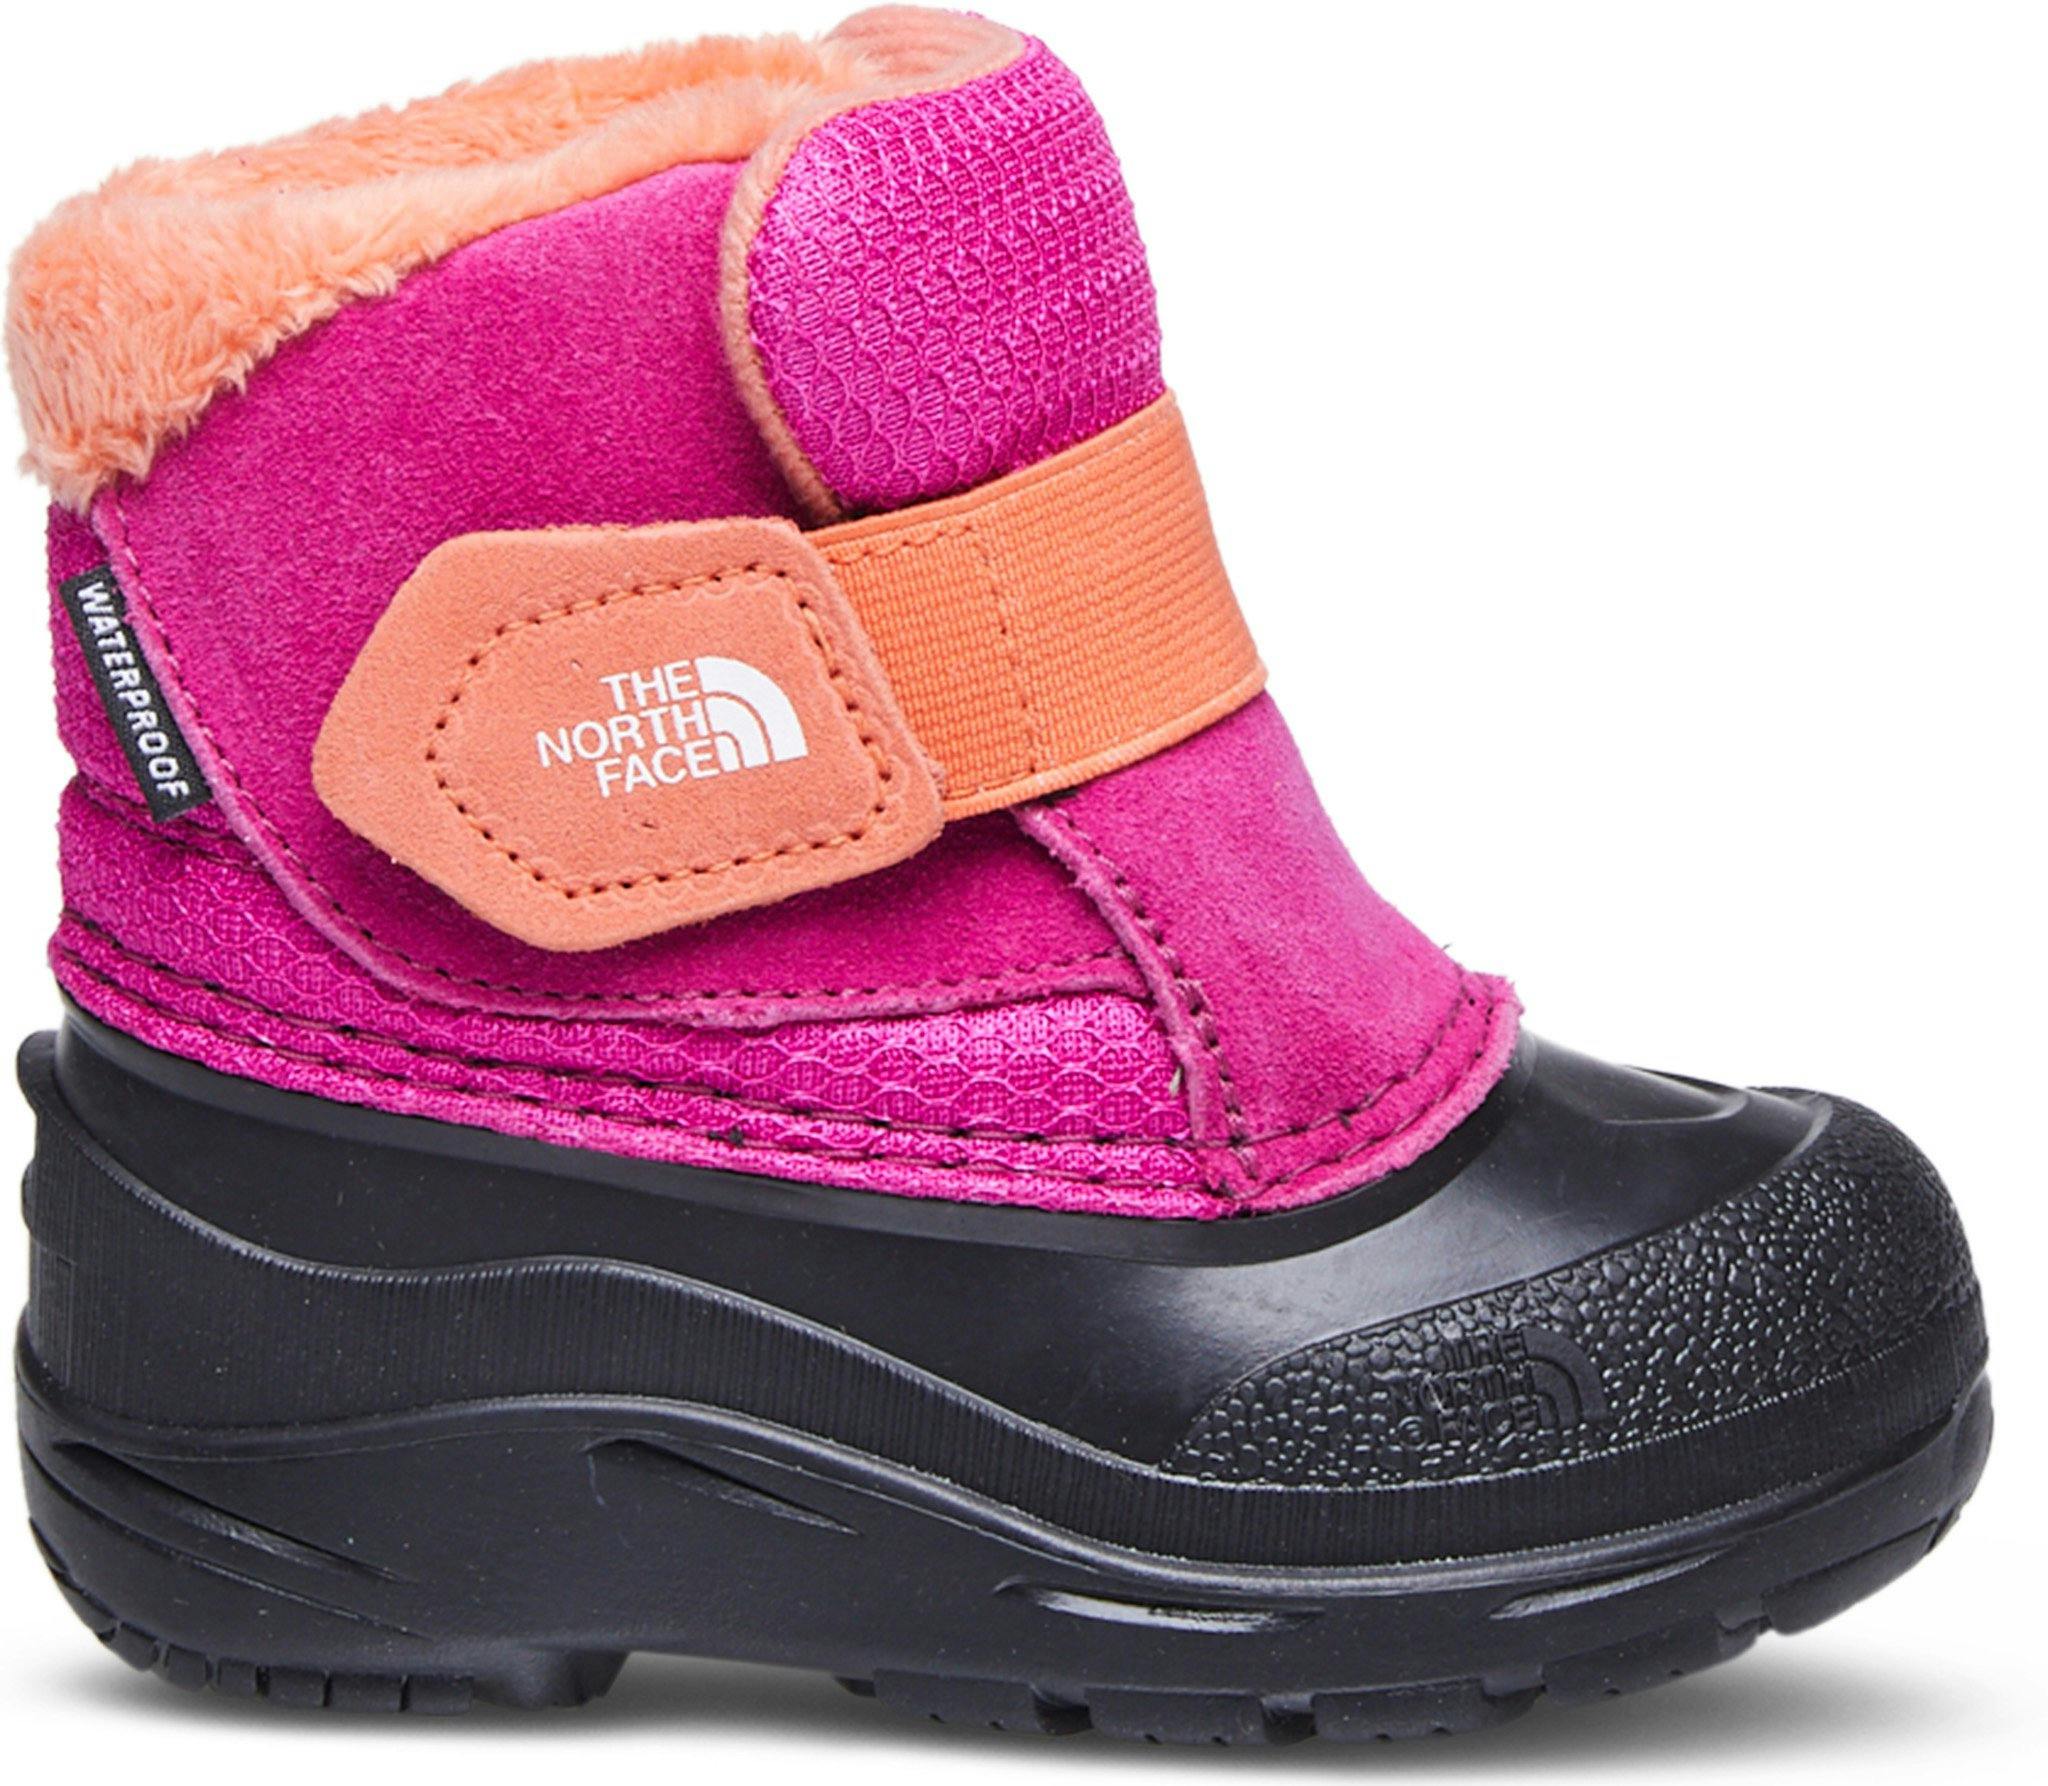 Product image for Alpenglow II Boots - Toddler